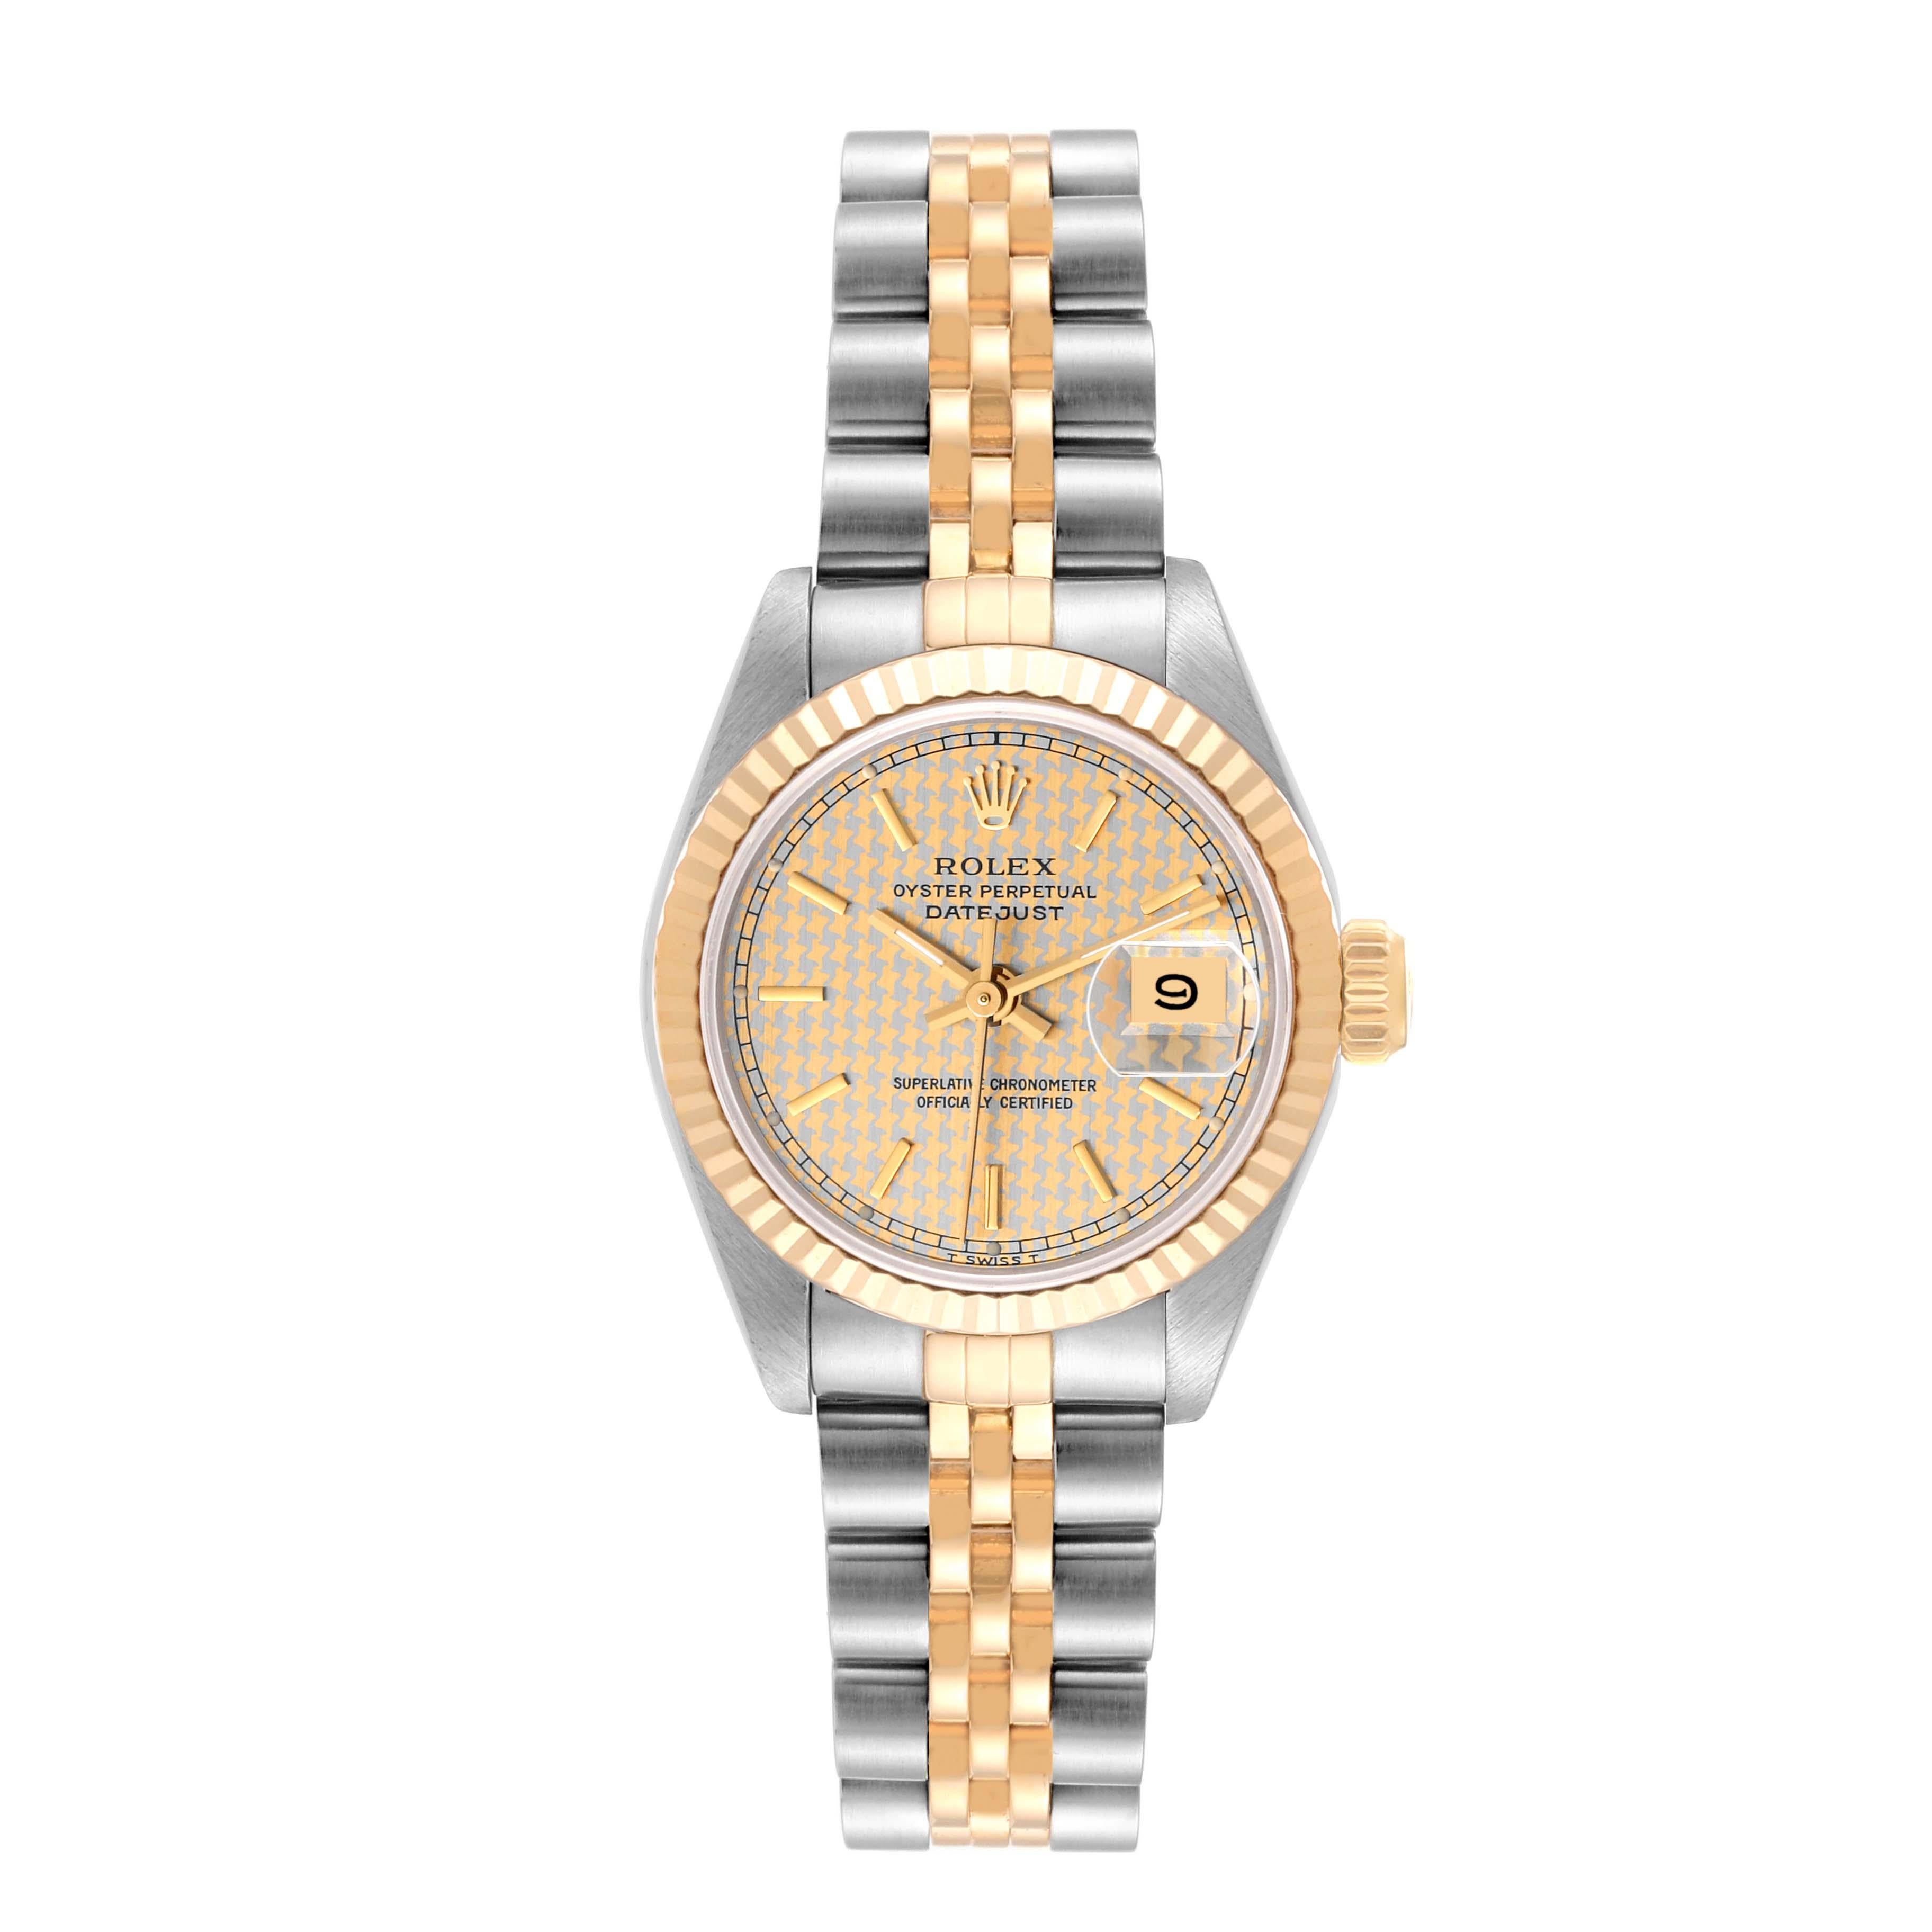 Rolex Datejust Steel Yellow Gold Houndstooth Dial Ladies Watch 69173. Officially certified chronometer automatic self-winding movement. Stainless steel oyster case 26.0 mm in diameter. Rolex logo on the crown. 18k yellow gold fluted bezel. Scratch